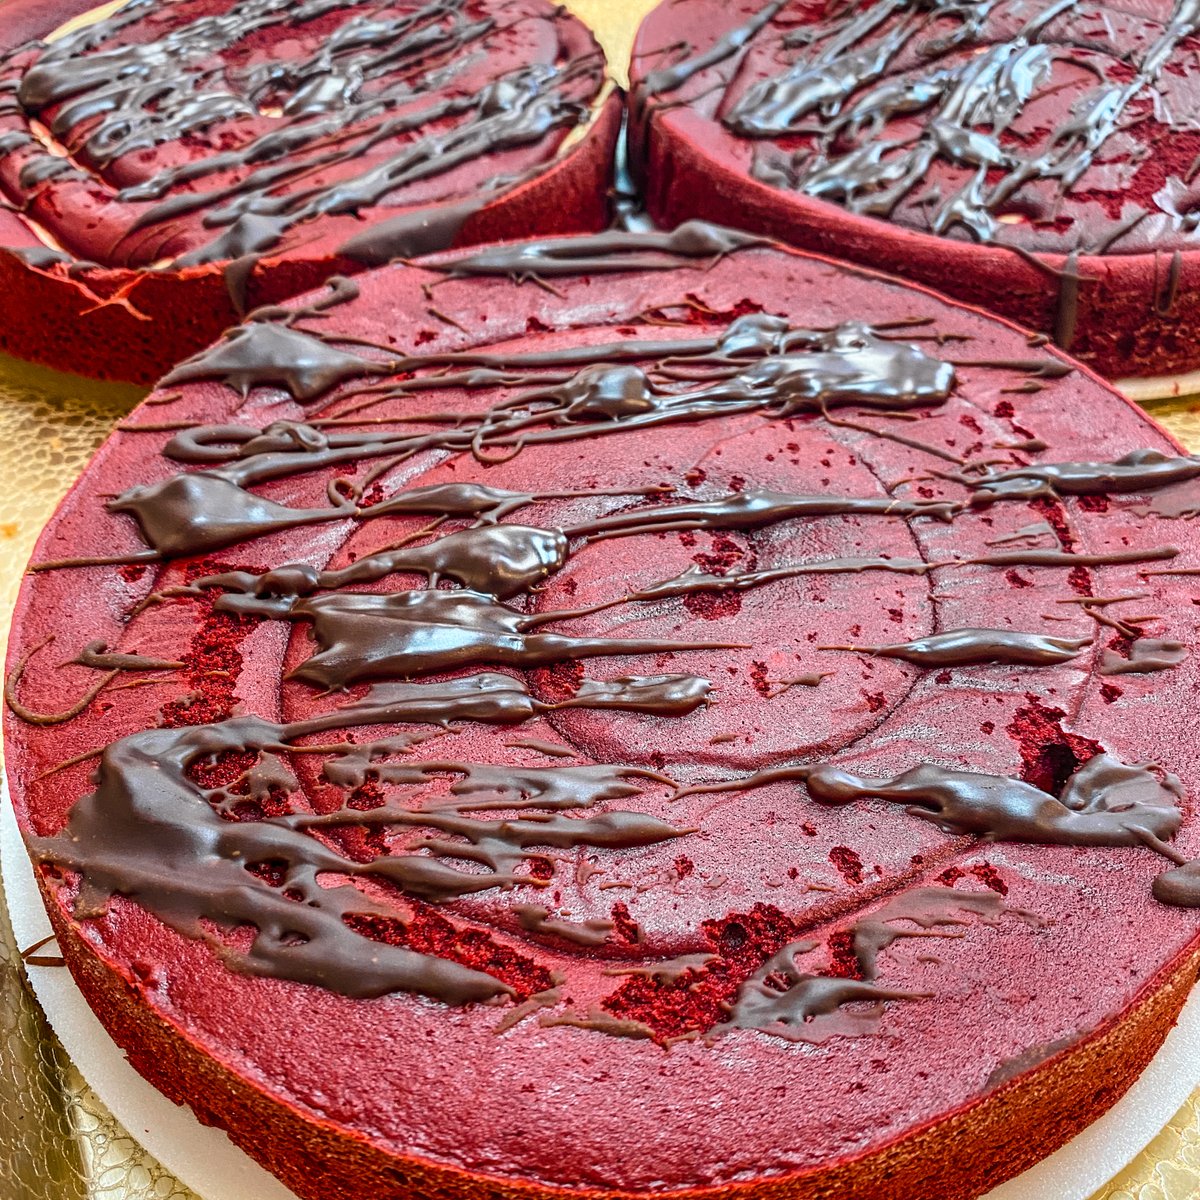 Our feature this week is Red Velvet Cream Cheese Cake!
Make sure to swing by and grab a sample!
#pastries #cookies #cakes #smallbusiness
#florissant #paczki #familyowned #helferspastries #featureoftheweek